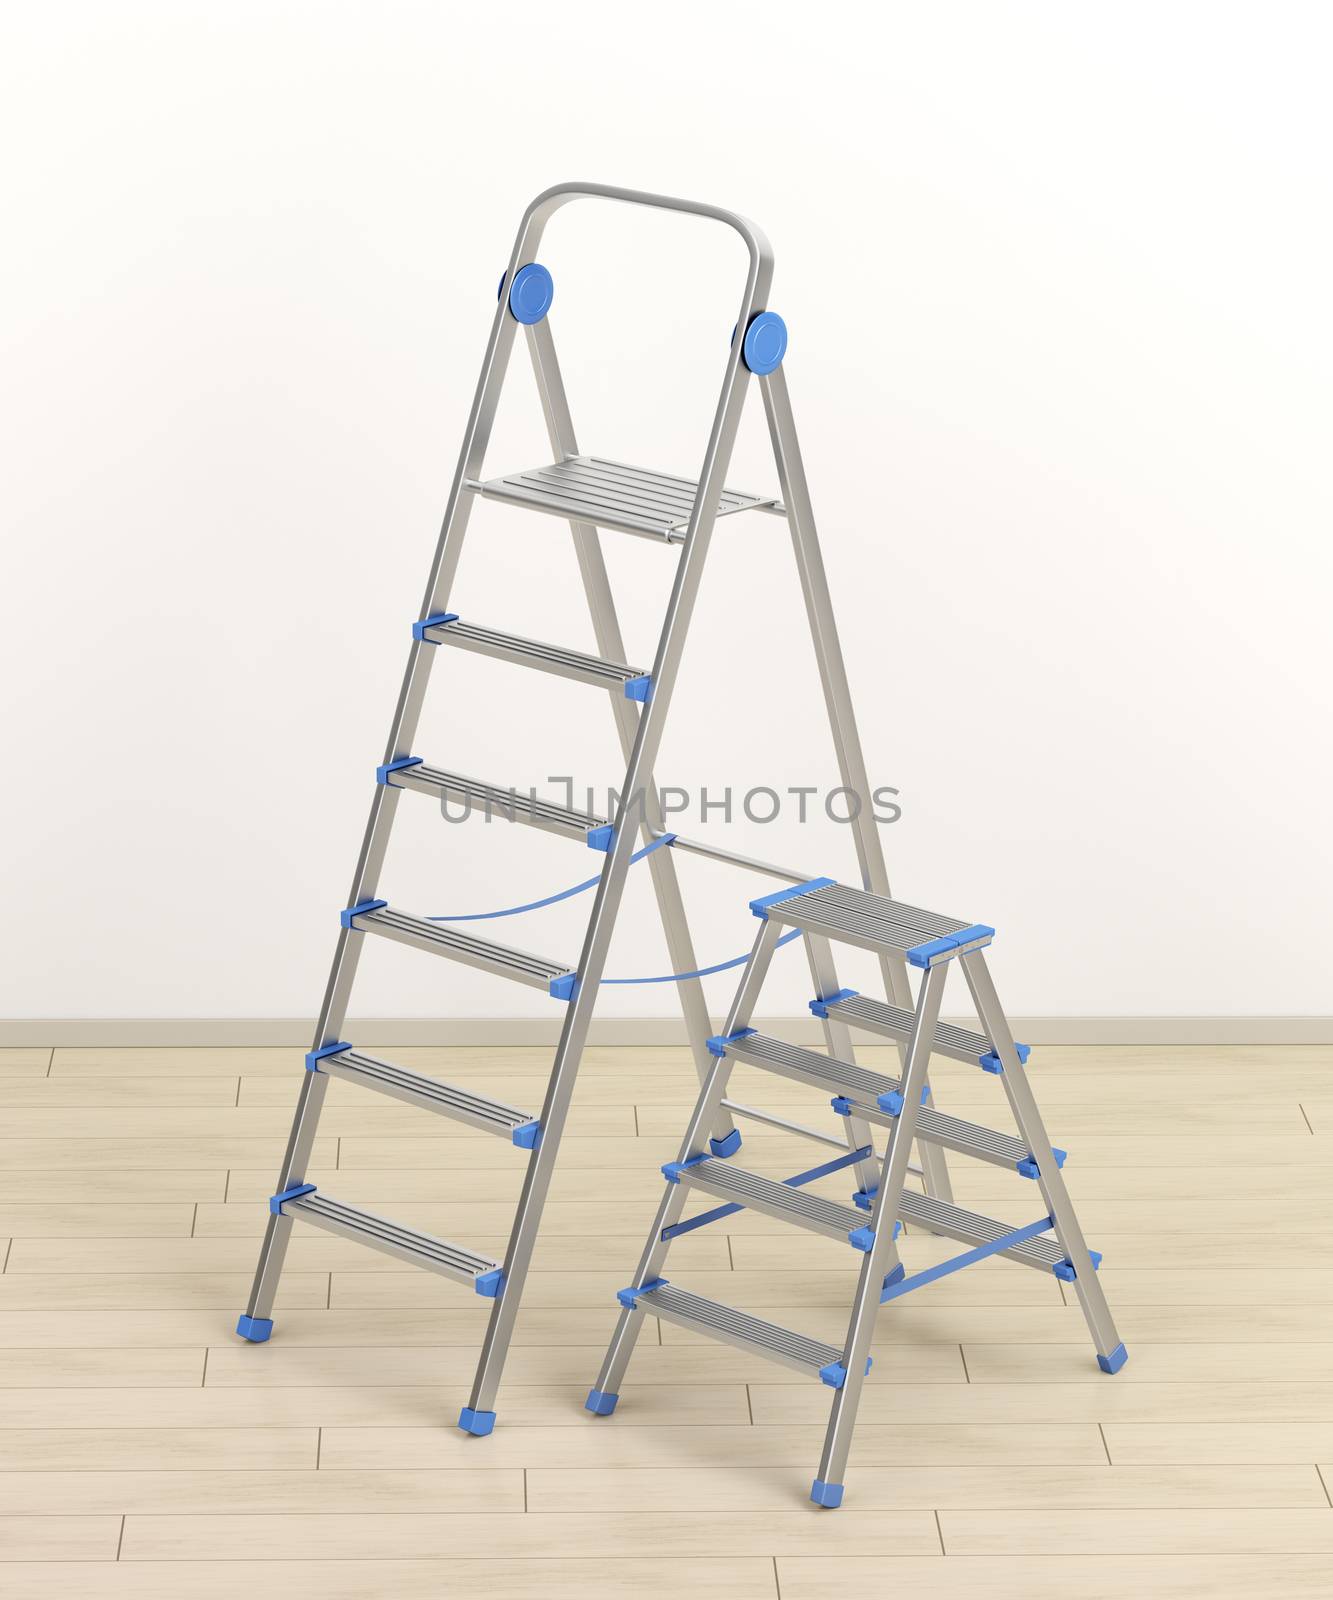 Ladders with different sizes by magraphics